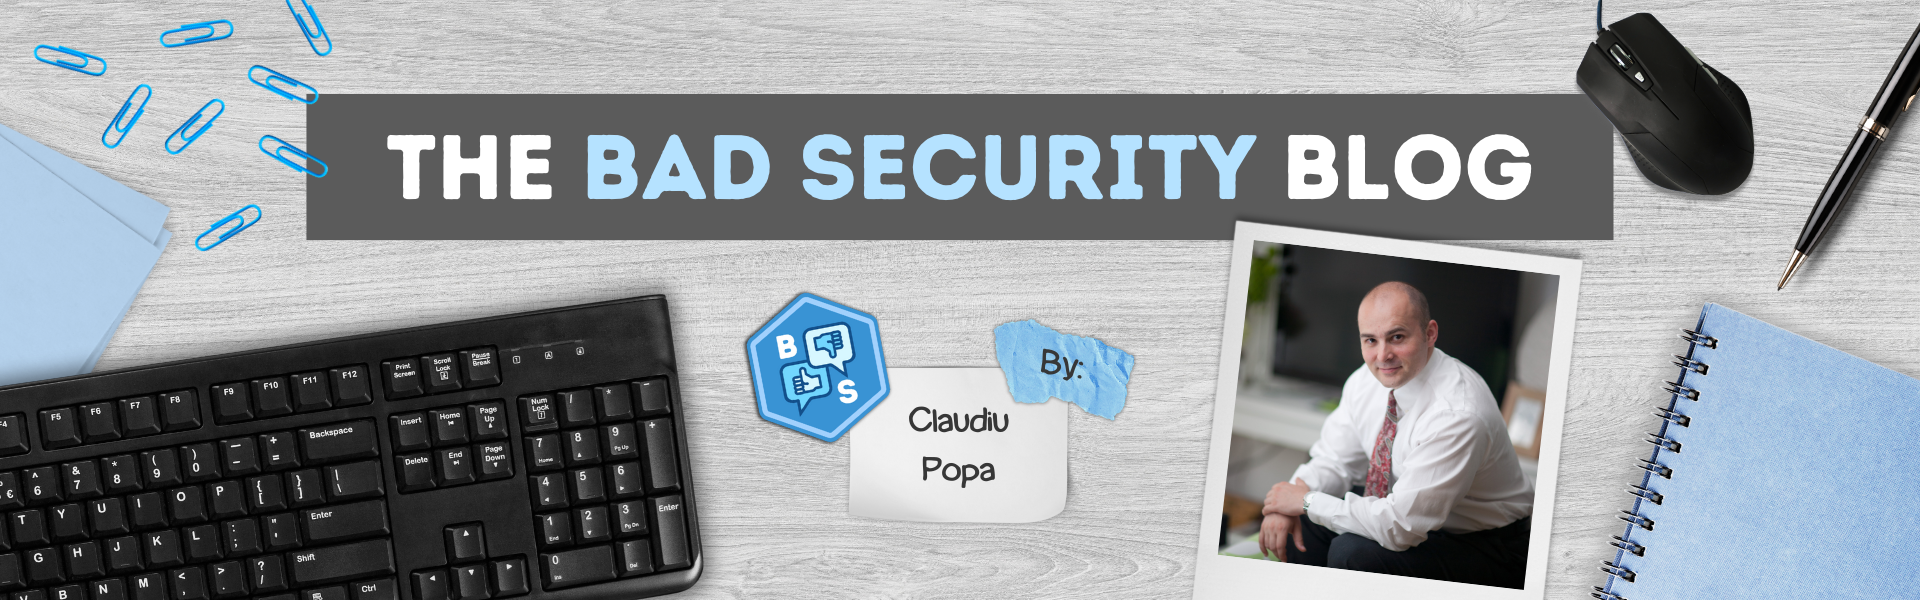 The Bad Security Blog